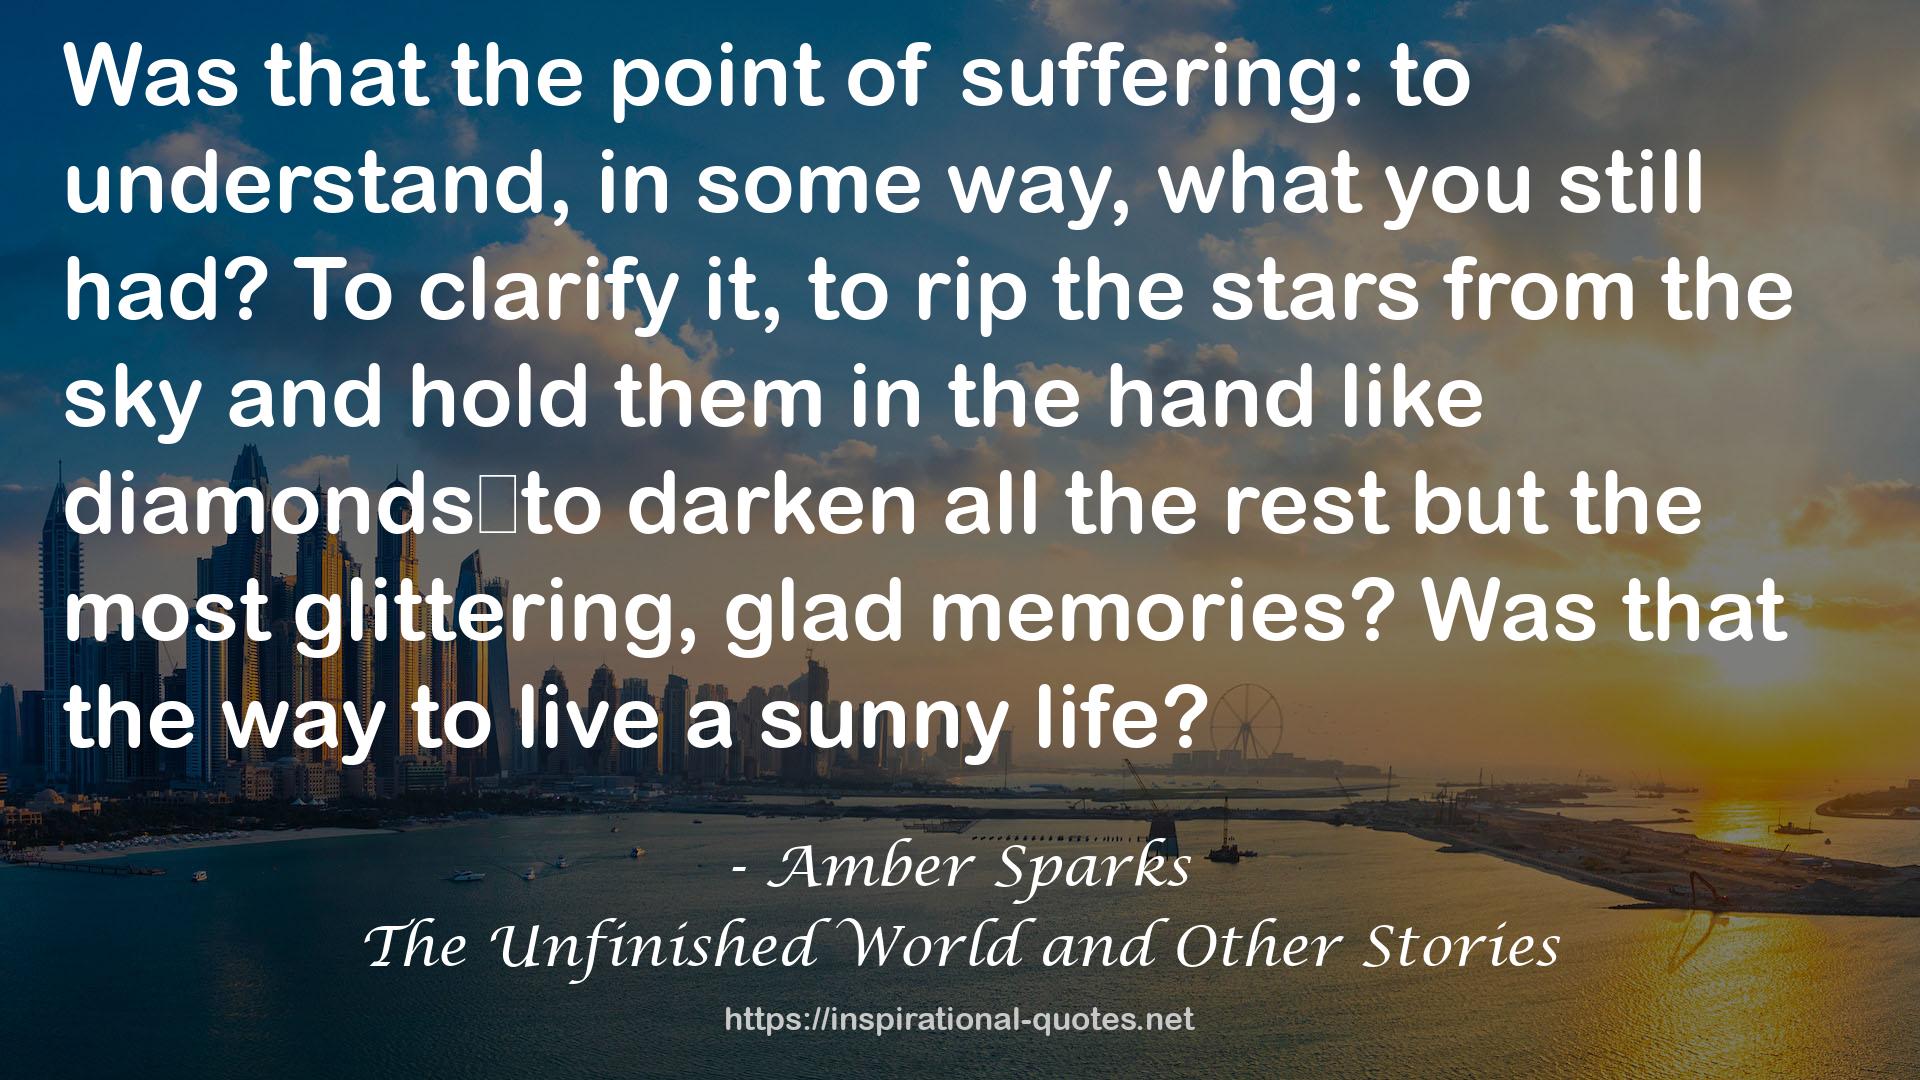 Amber Sparks QUOTES